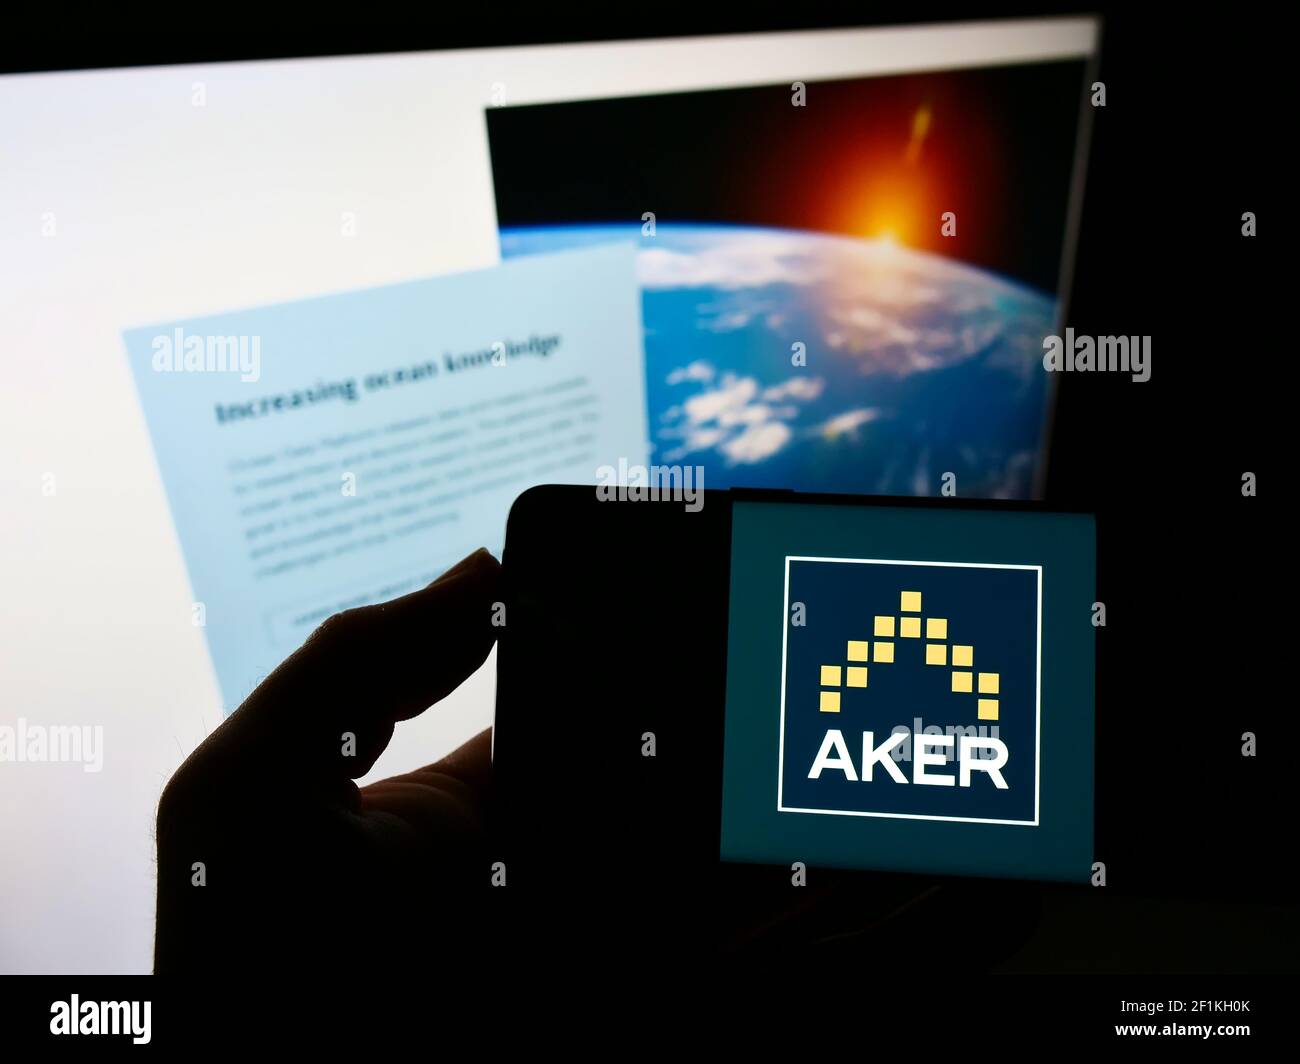 Person holding cellphone with business logo of Norwegian investment company Aker ASA on screen in front of web page. Focus on phone display. Stock Photo